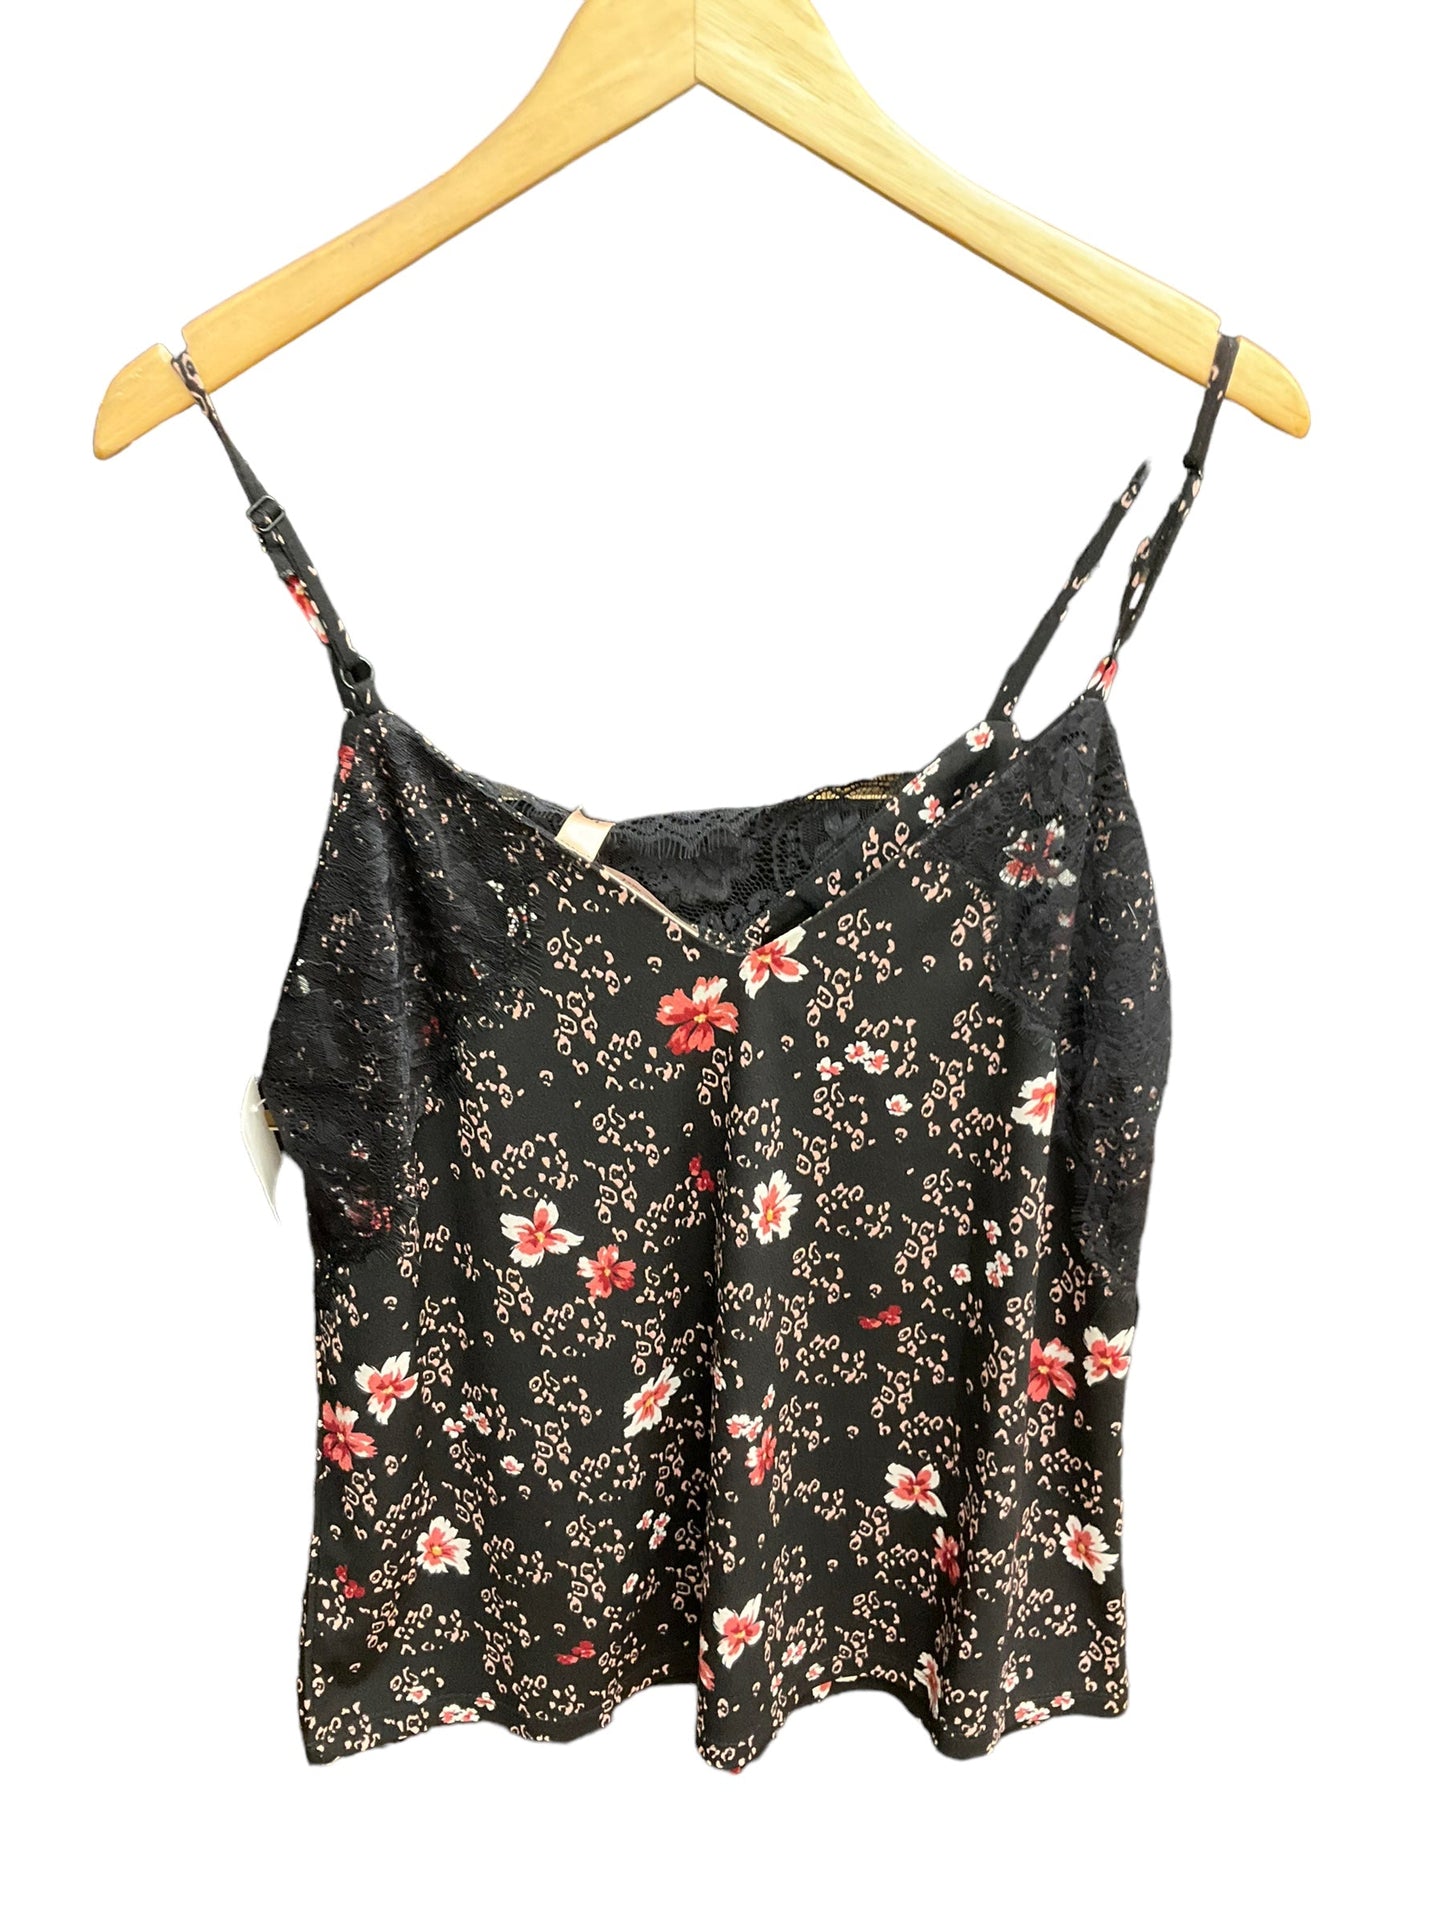 Floral Print Top Sleeveless Clothes Mentor, Size M